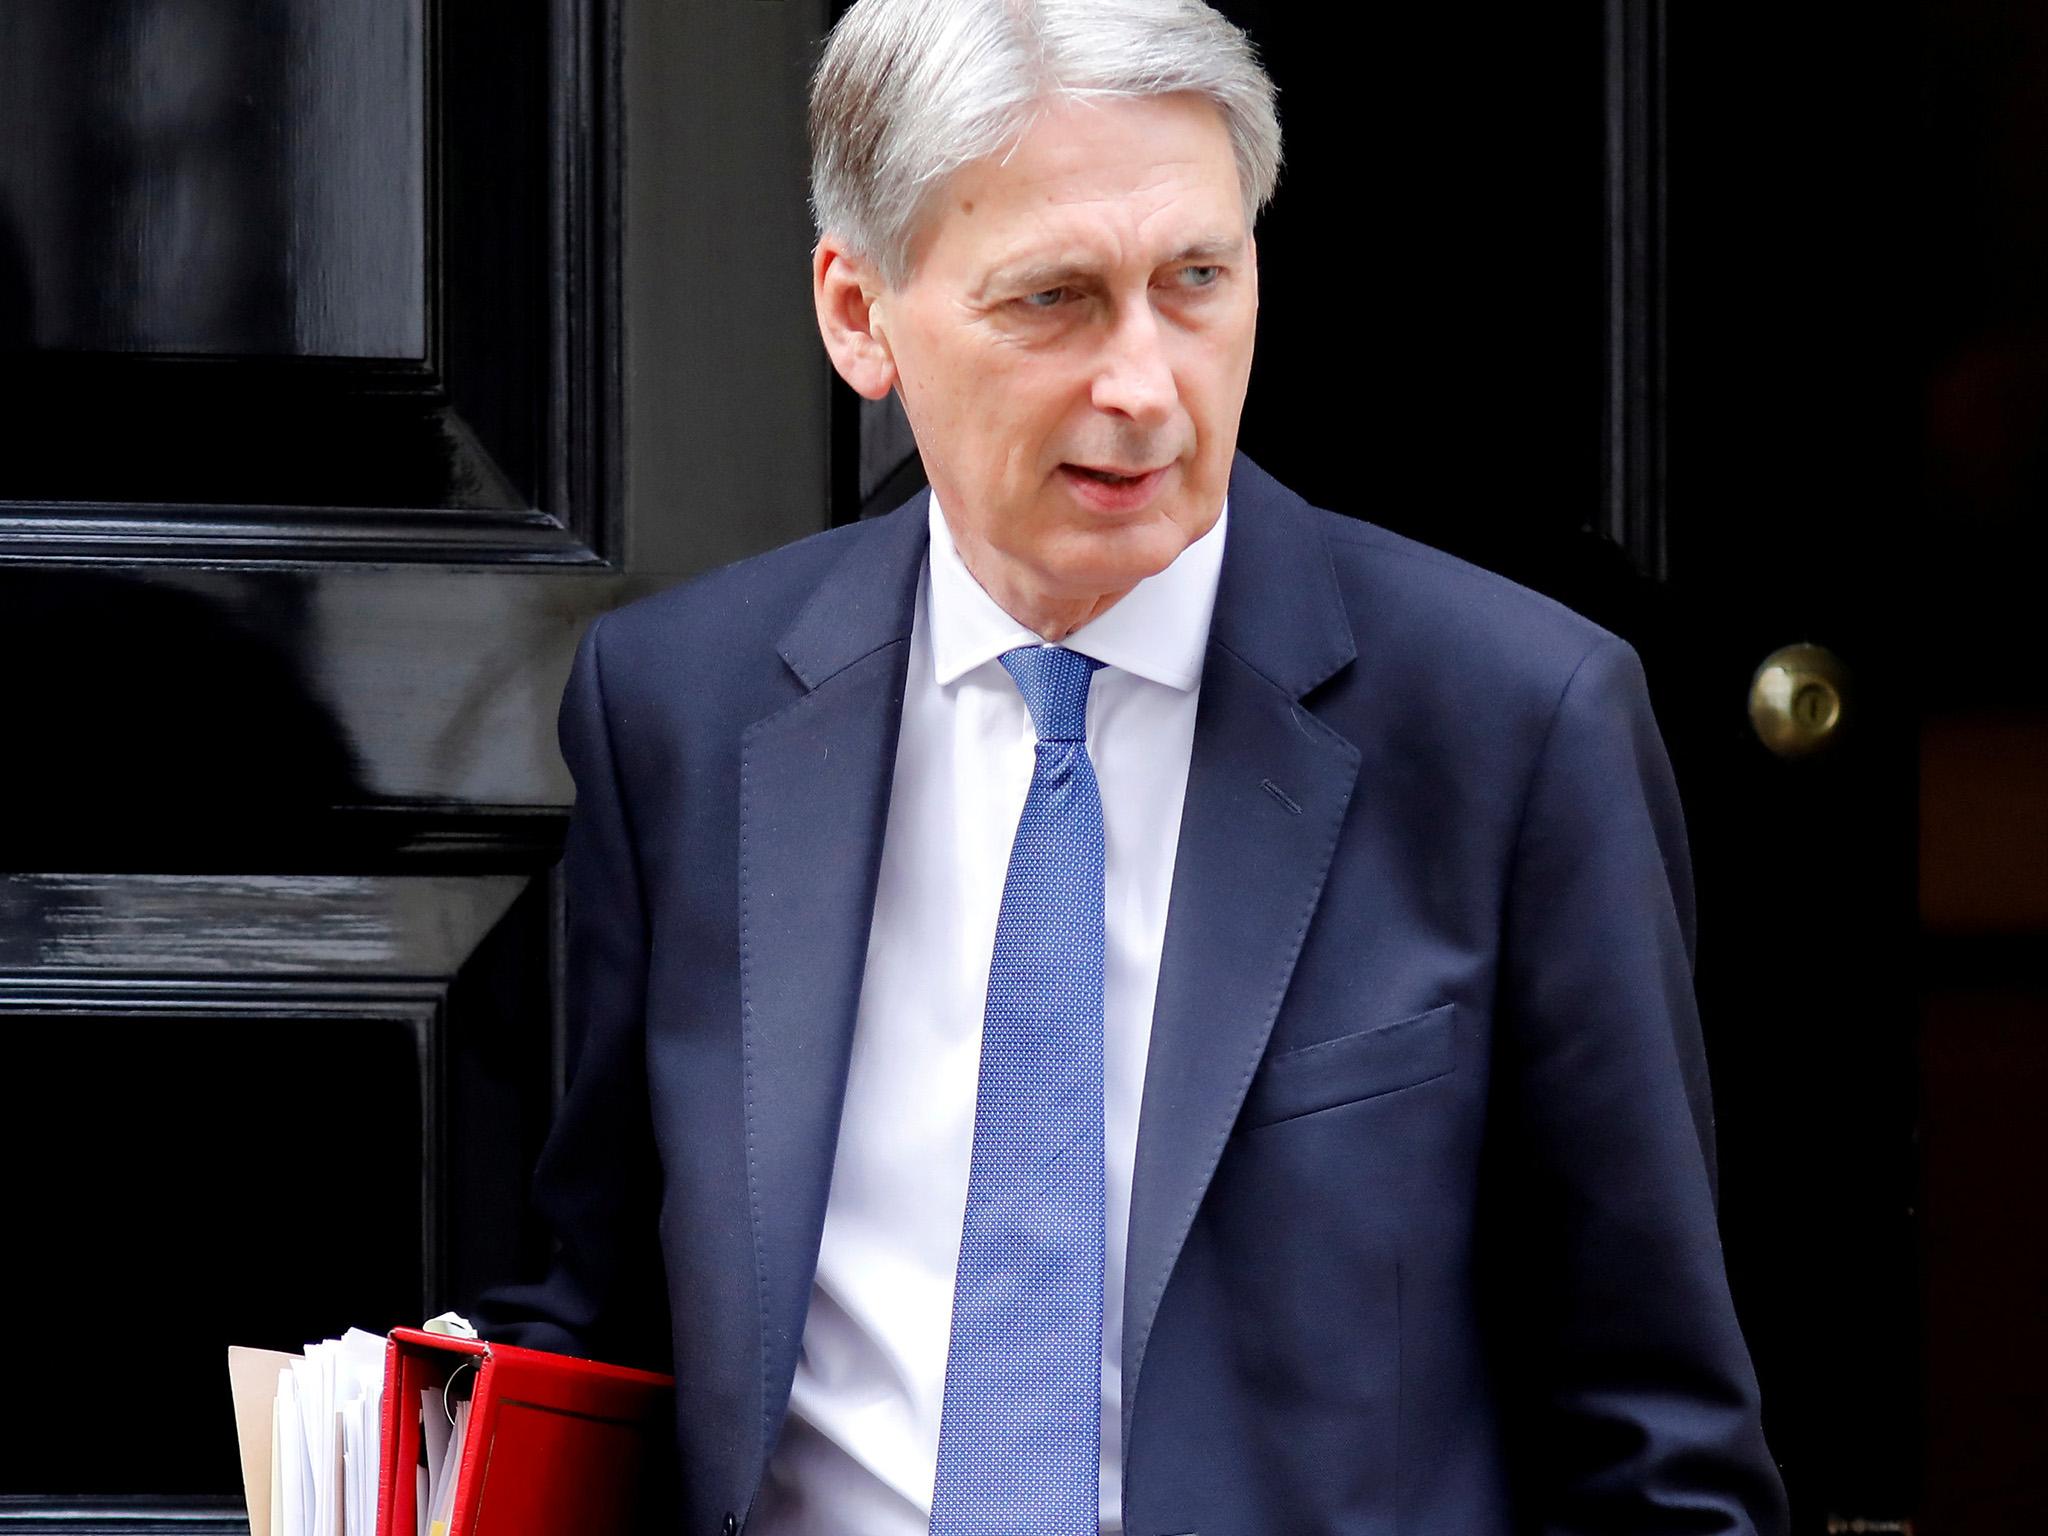 Chancellor Philip Hammond refused to back Ms May to lead the Tories to the next election